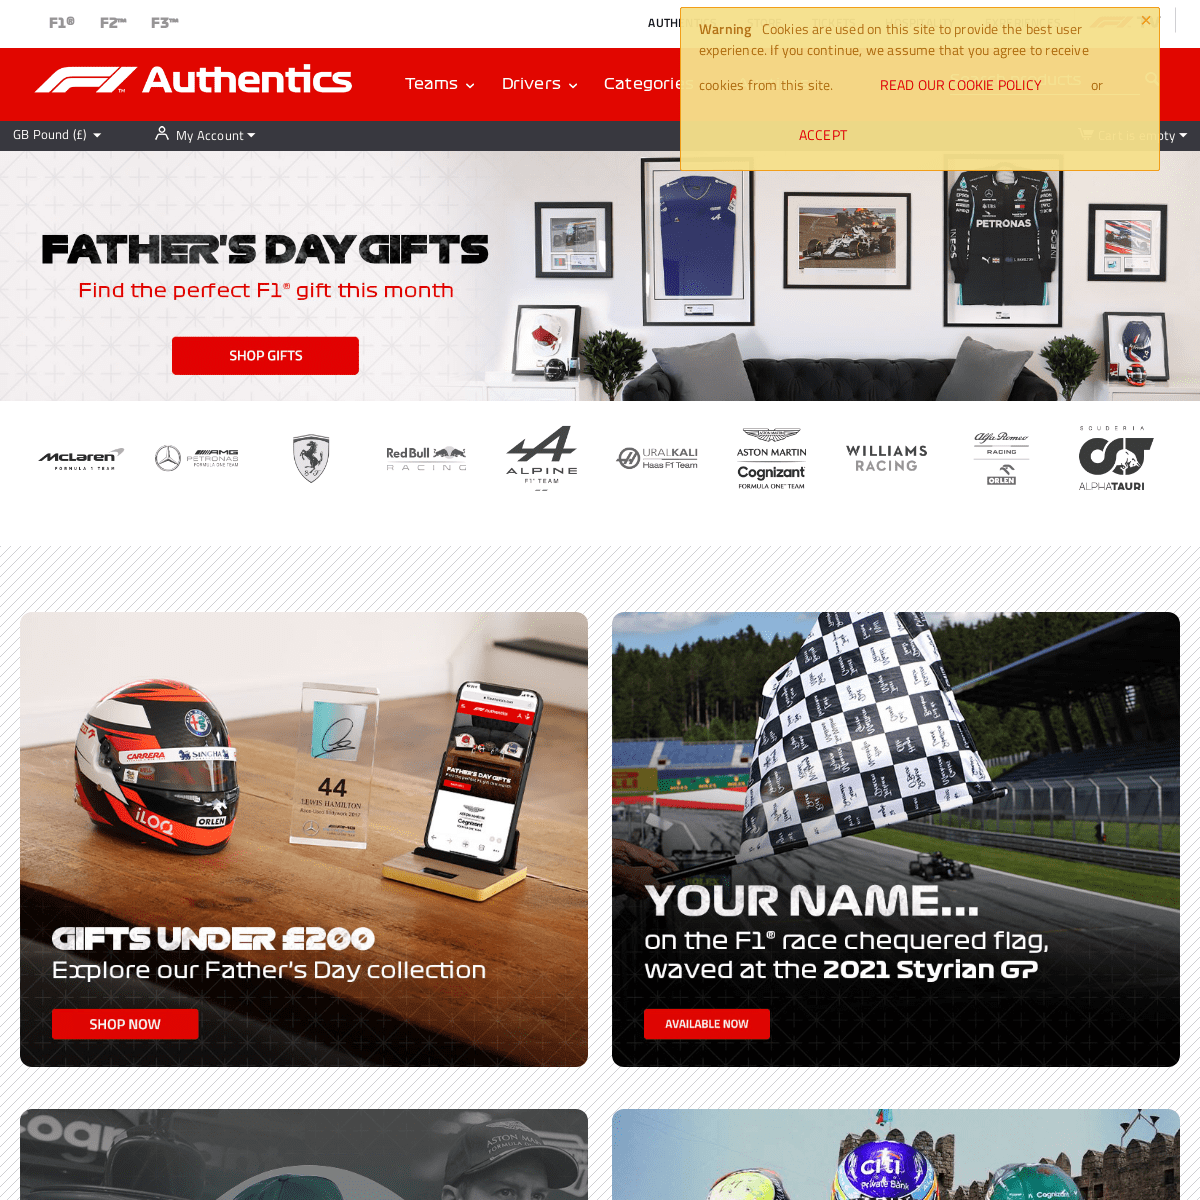 A complete backup of https://f1authentics.com